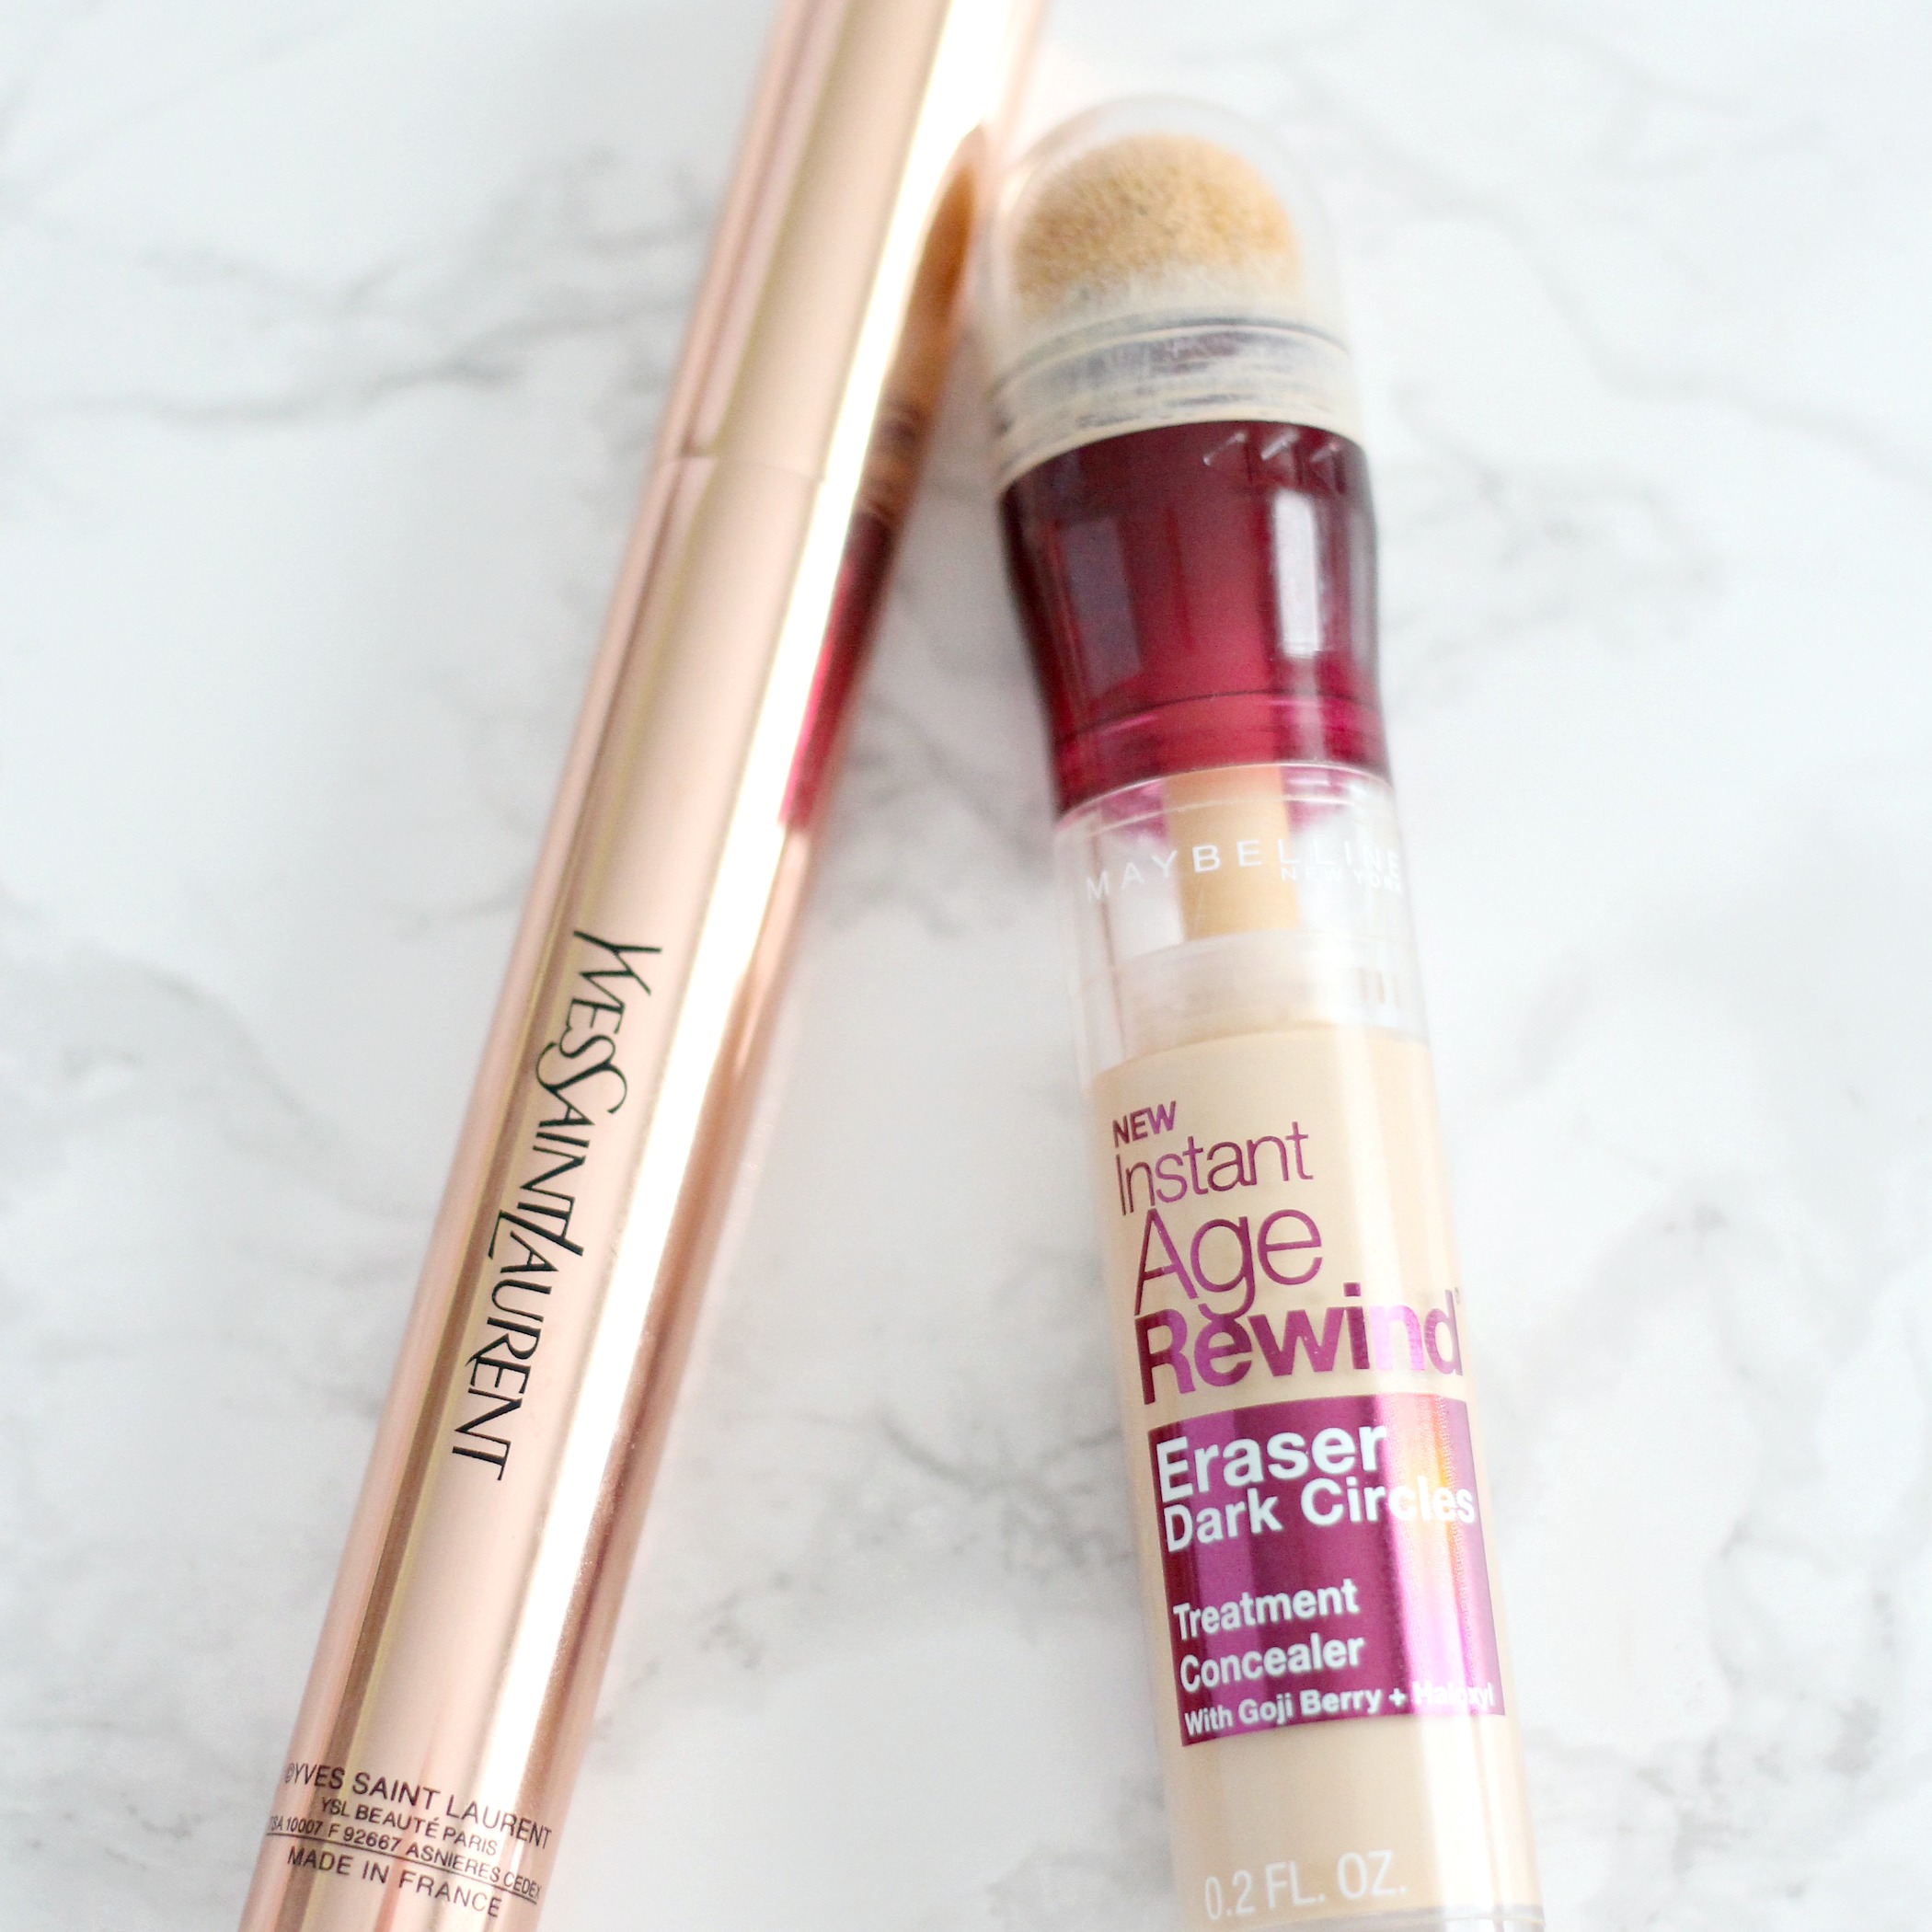 Dupe: YSL Touche Eclat Neutralizer vs Maybelline Instant Age Rewind